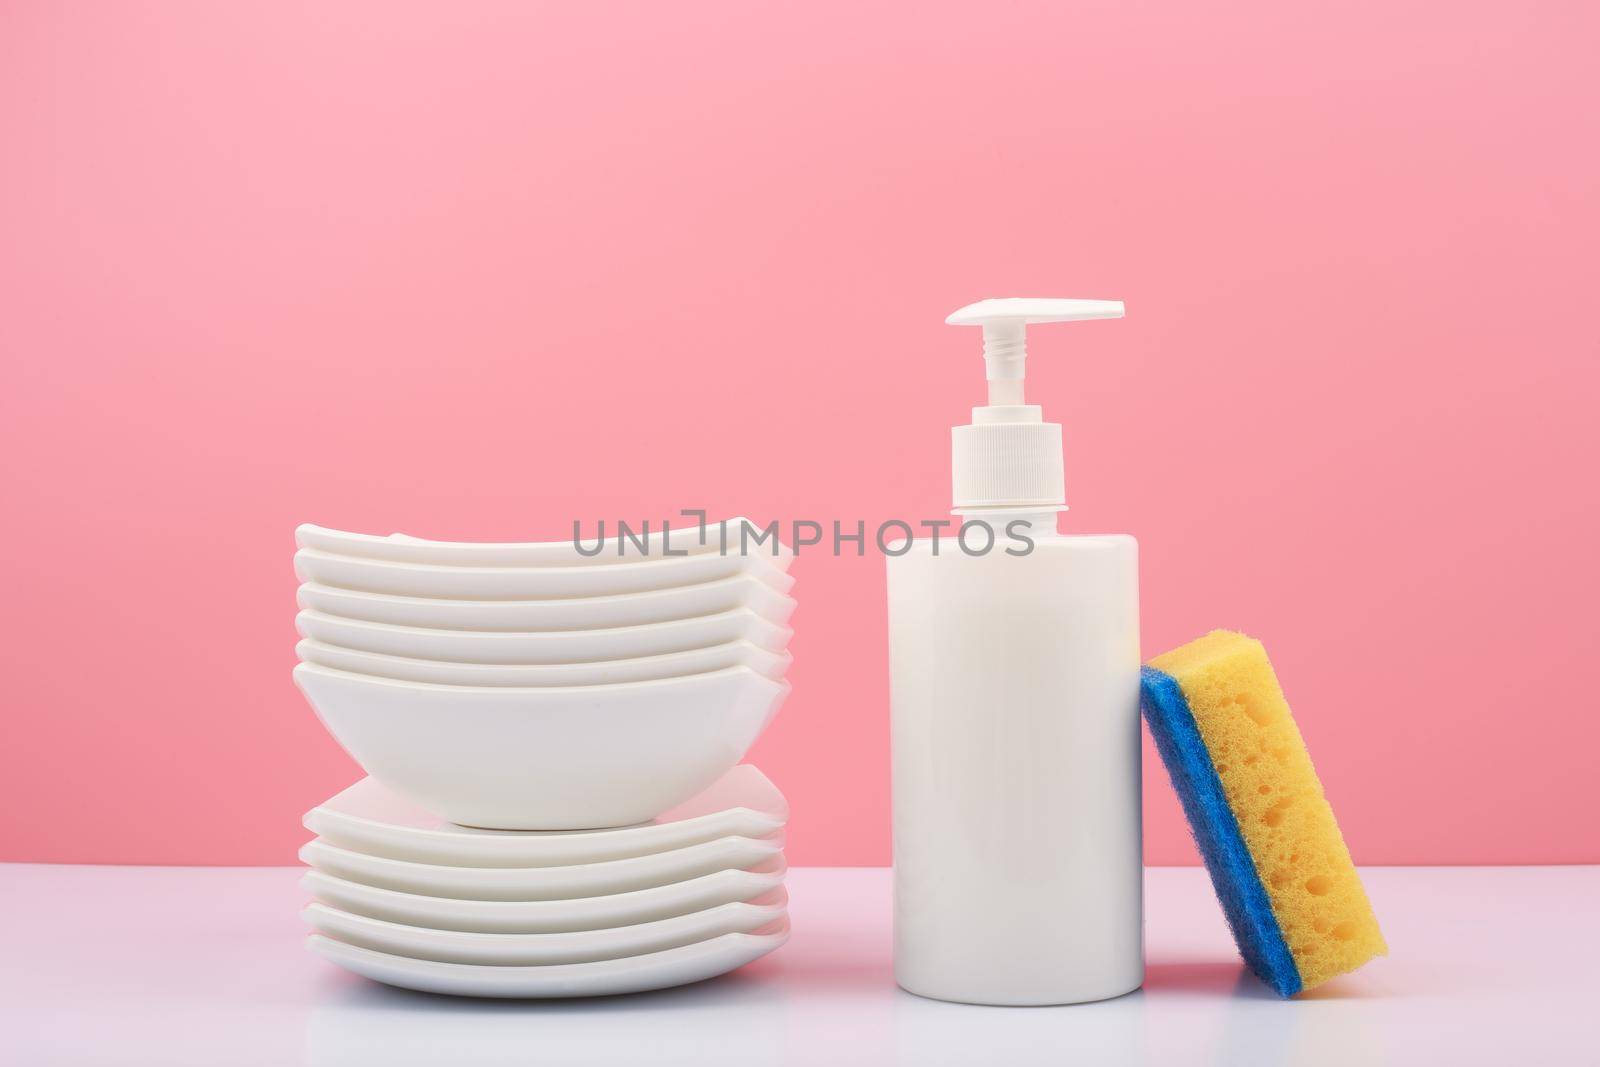 Dishwashing and housework concept. Clean white ceramic plates, detergent in white plastic tube andyellow cleaning sponge against bright pink background. 